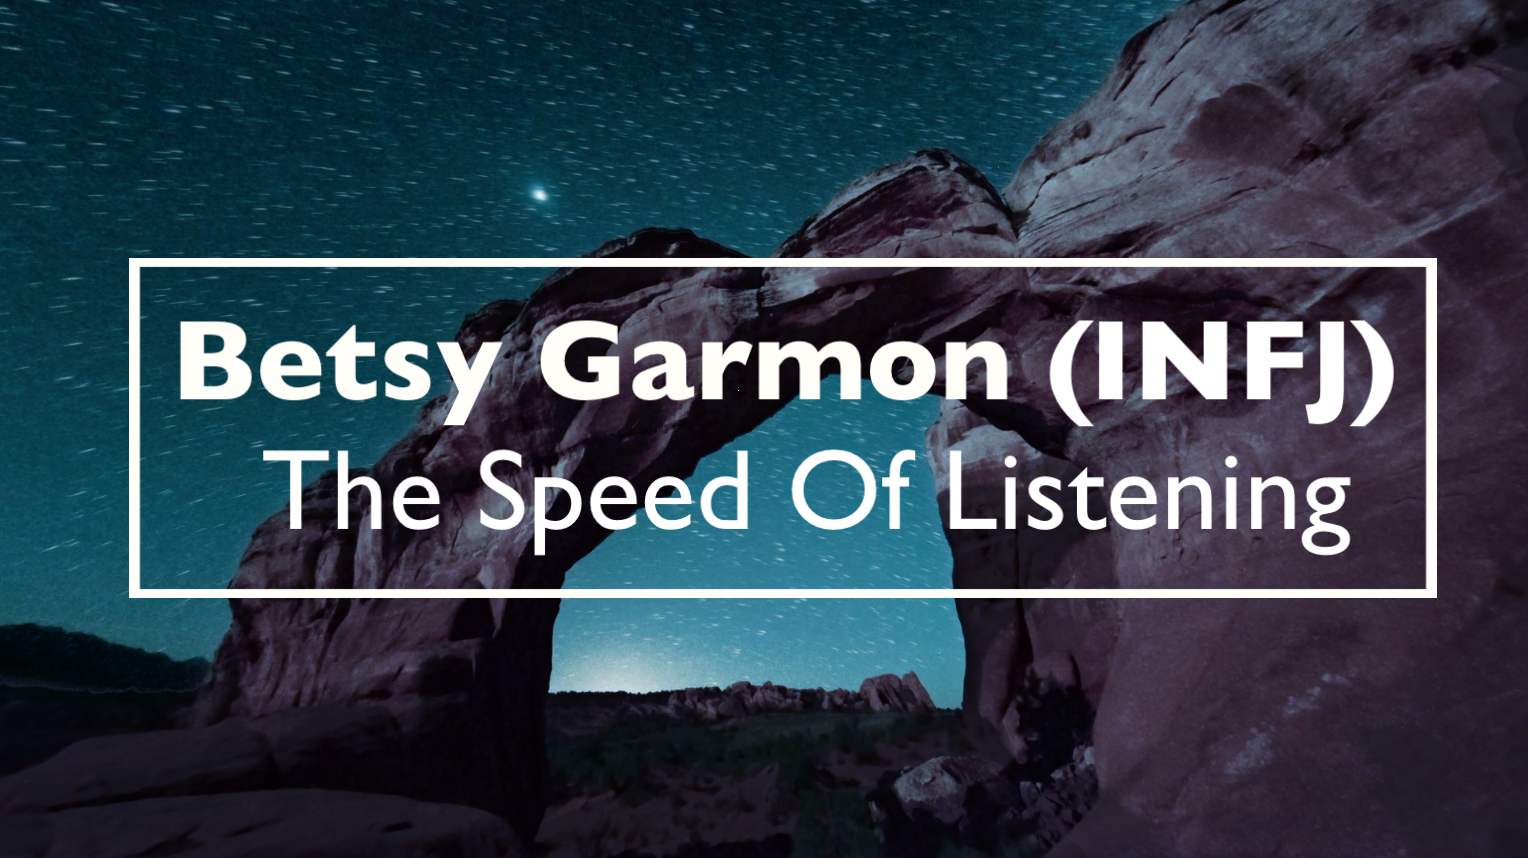 [VIDEO] "The Speed Of Listening" with Betsy Garmon (INFJ)